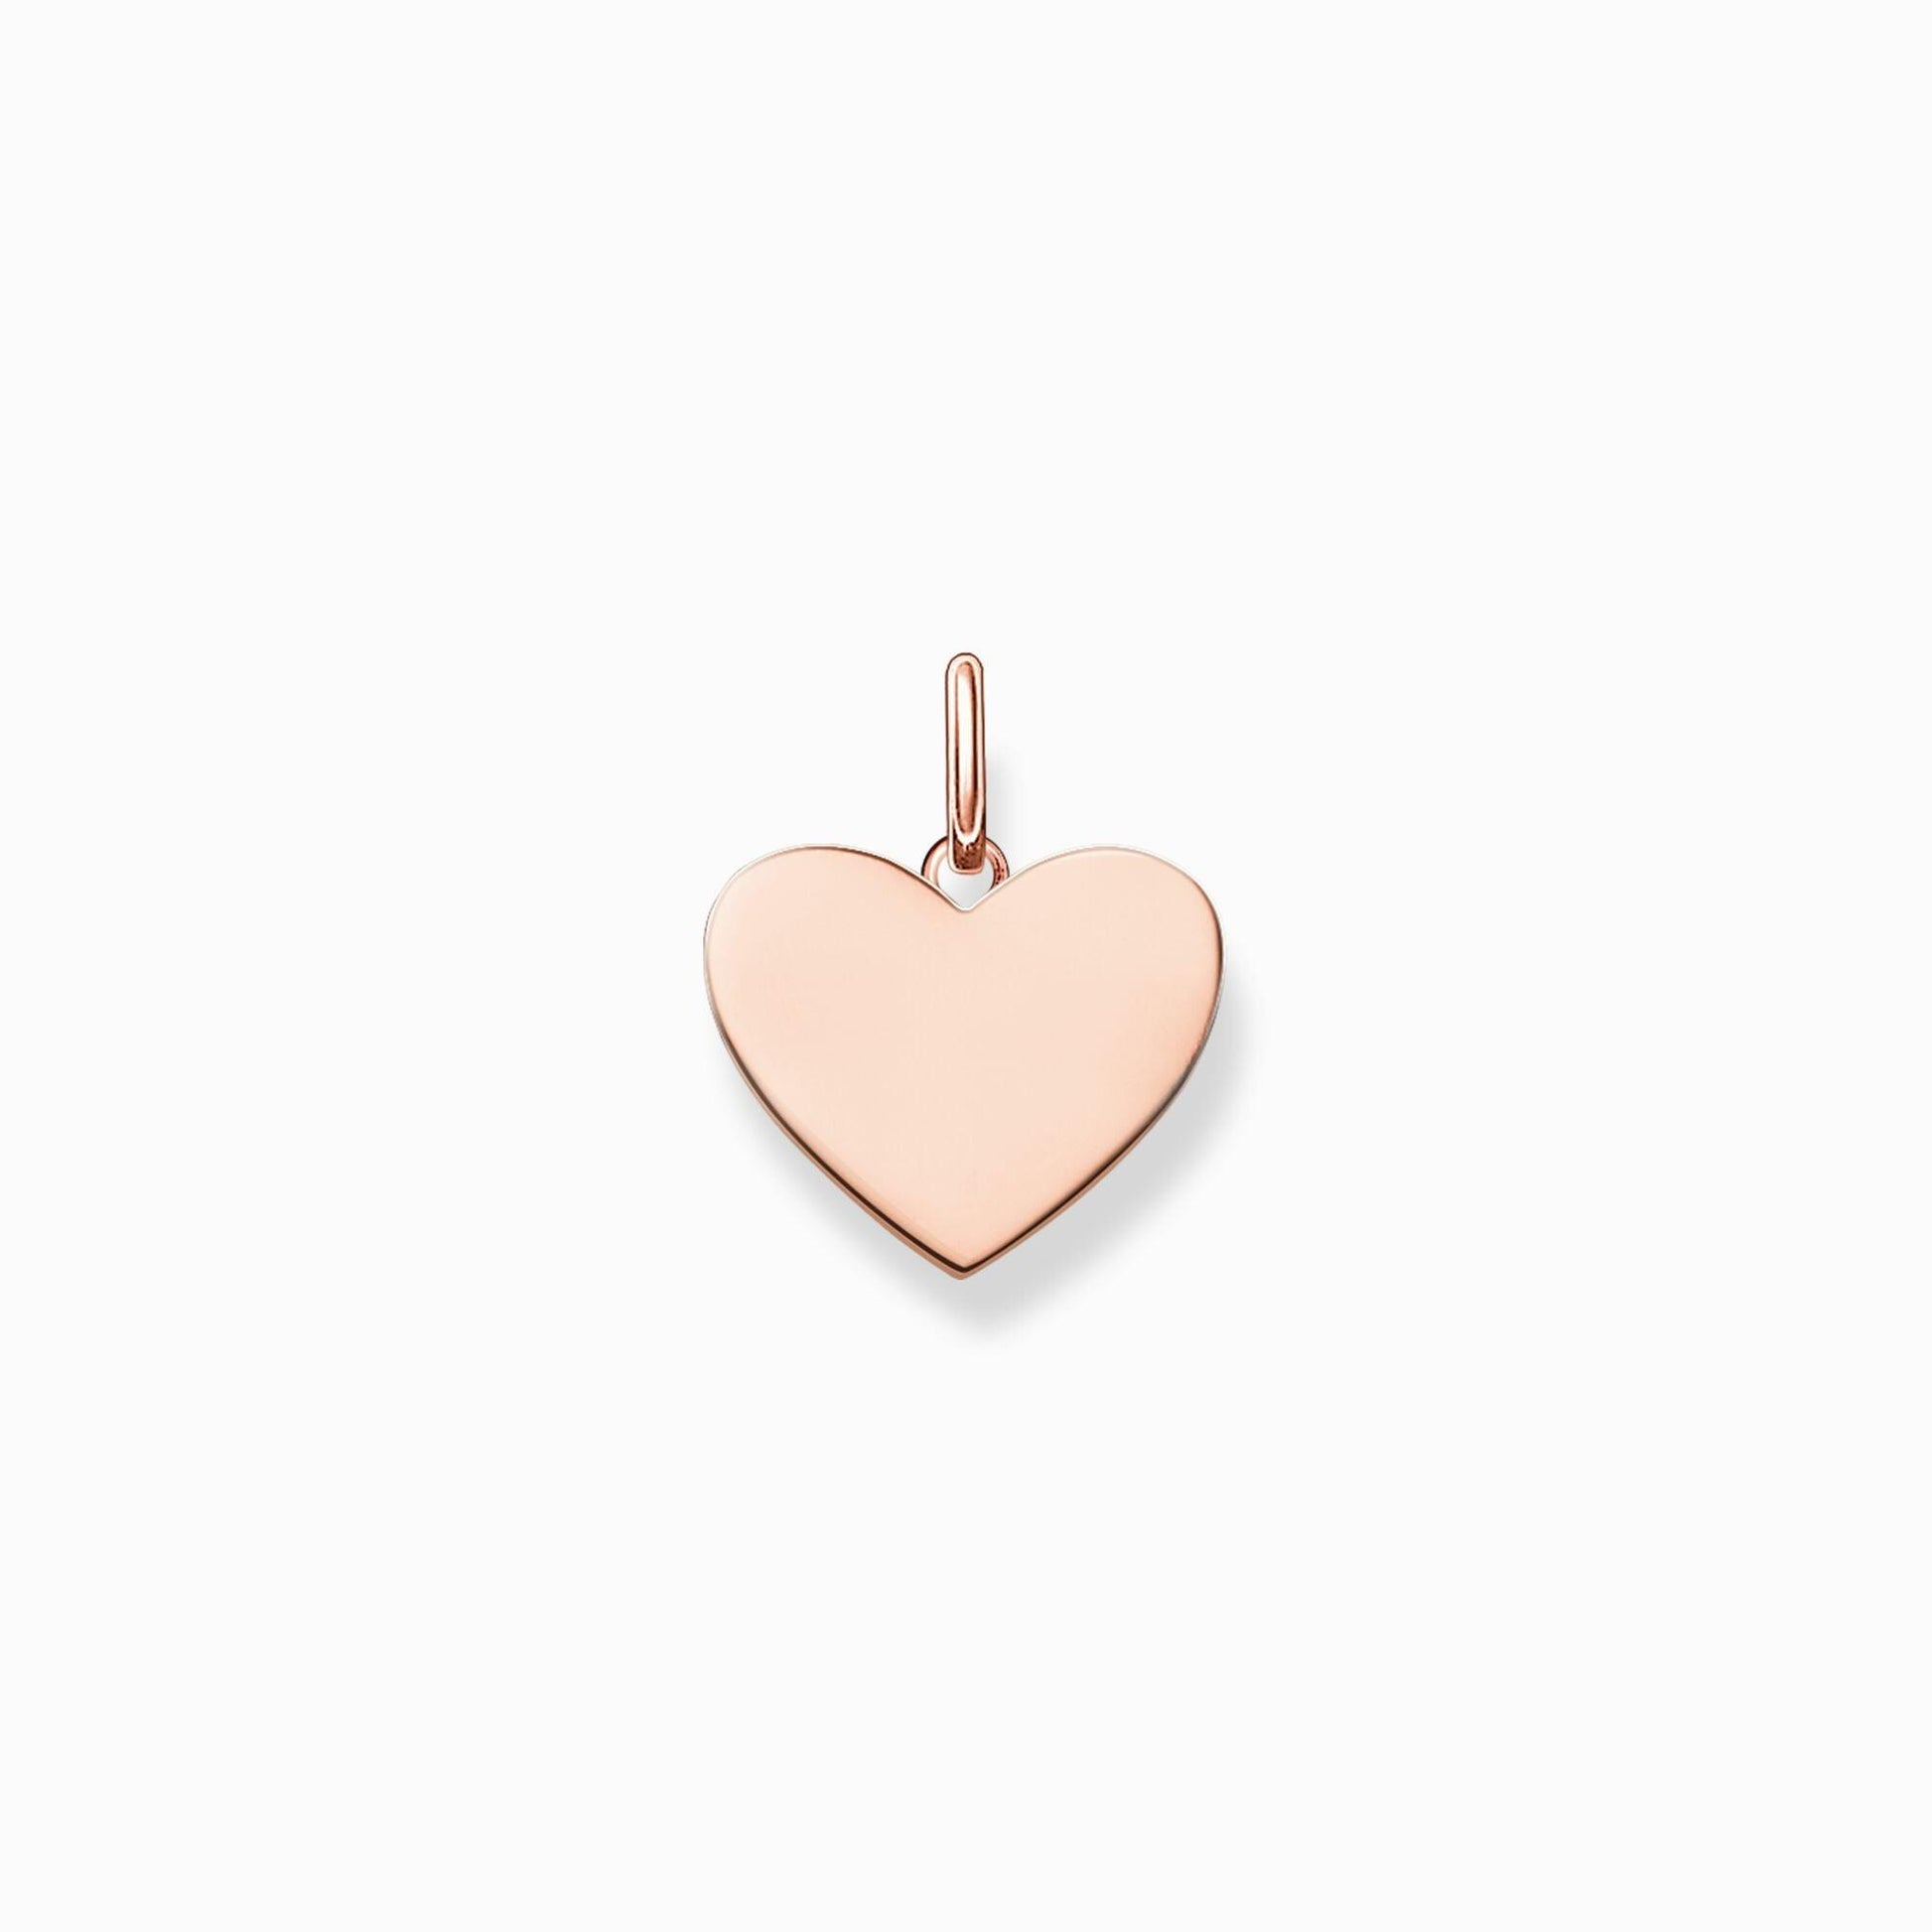 Thomas Sabo Rose Gold-Plated Heart Pendant LBPE0002 - Judith Hart Jewellers